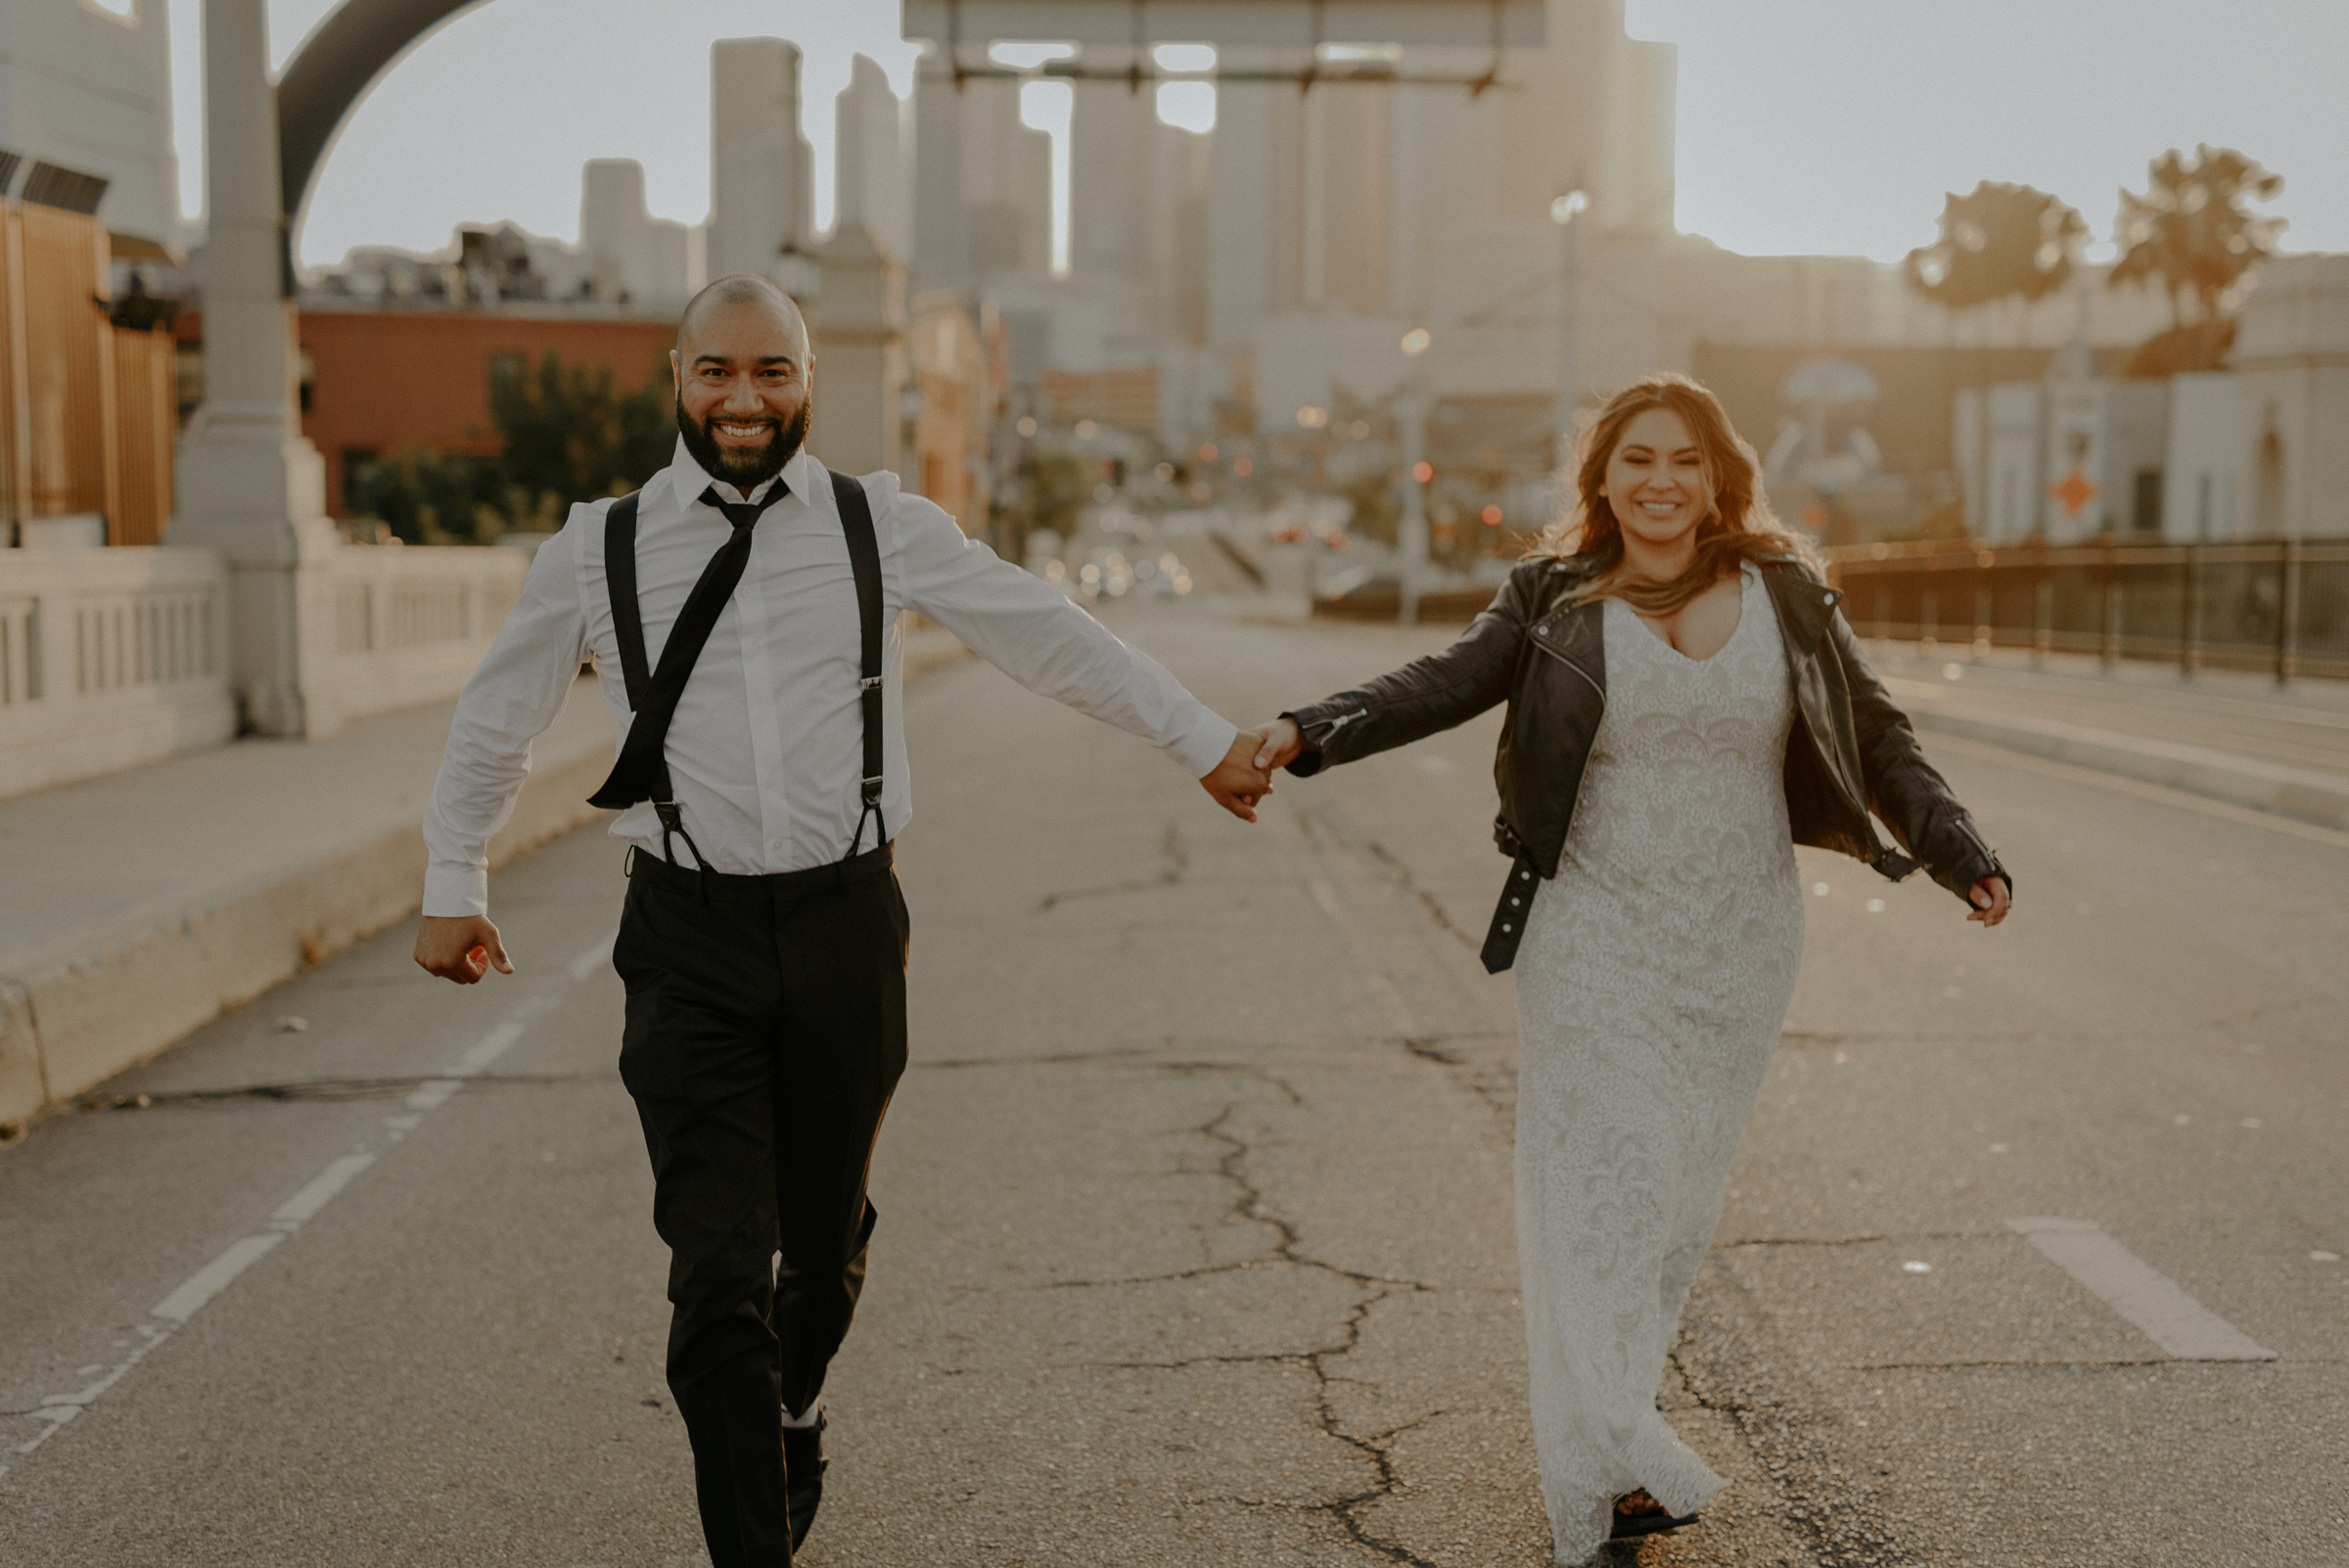 Isaiah + Taylor Photography - Los Angeles Wedding Photographer - DTLA Arts District  Engagement Session  069.jpg